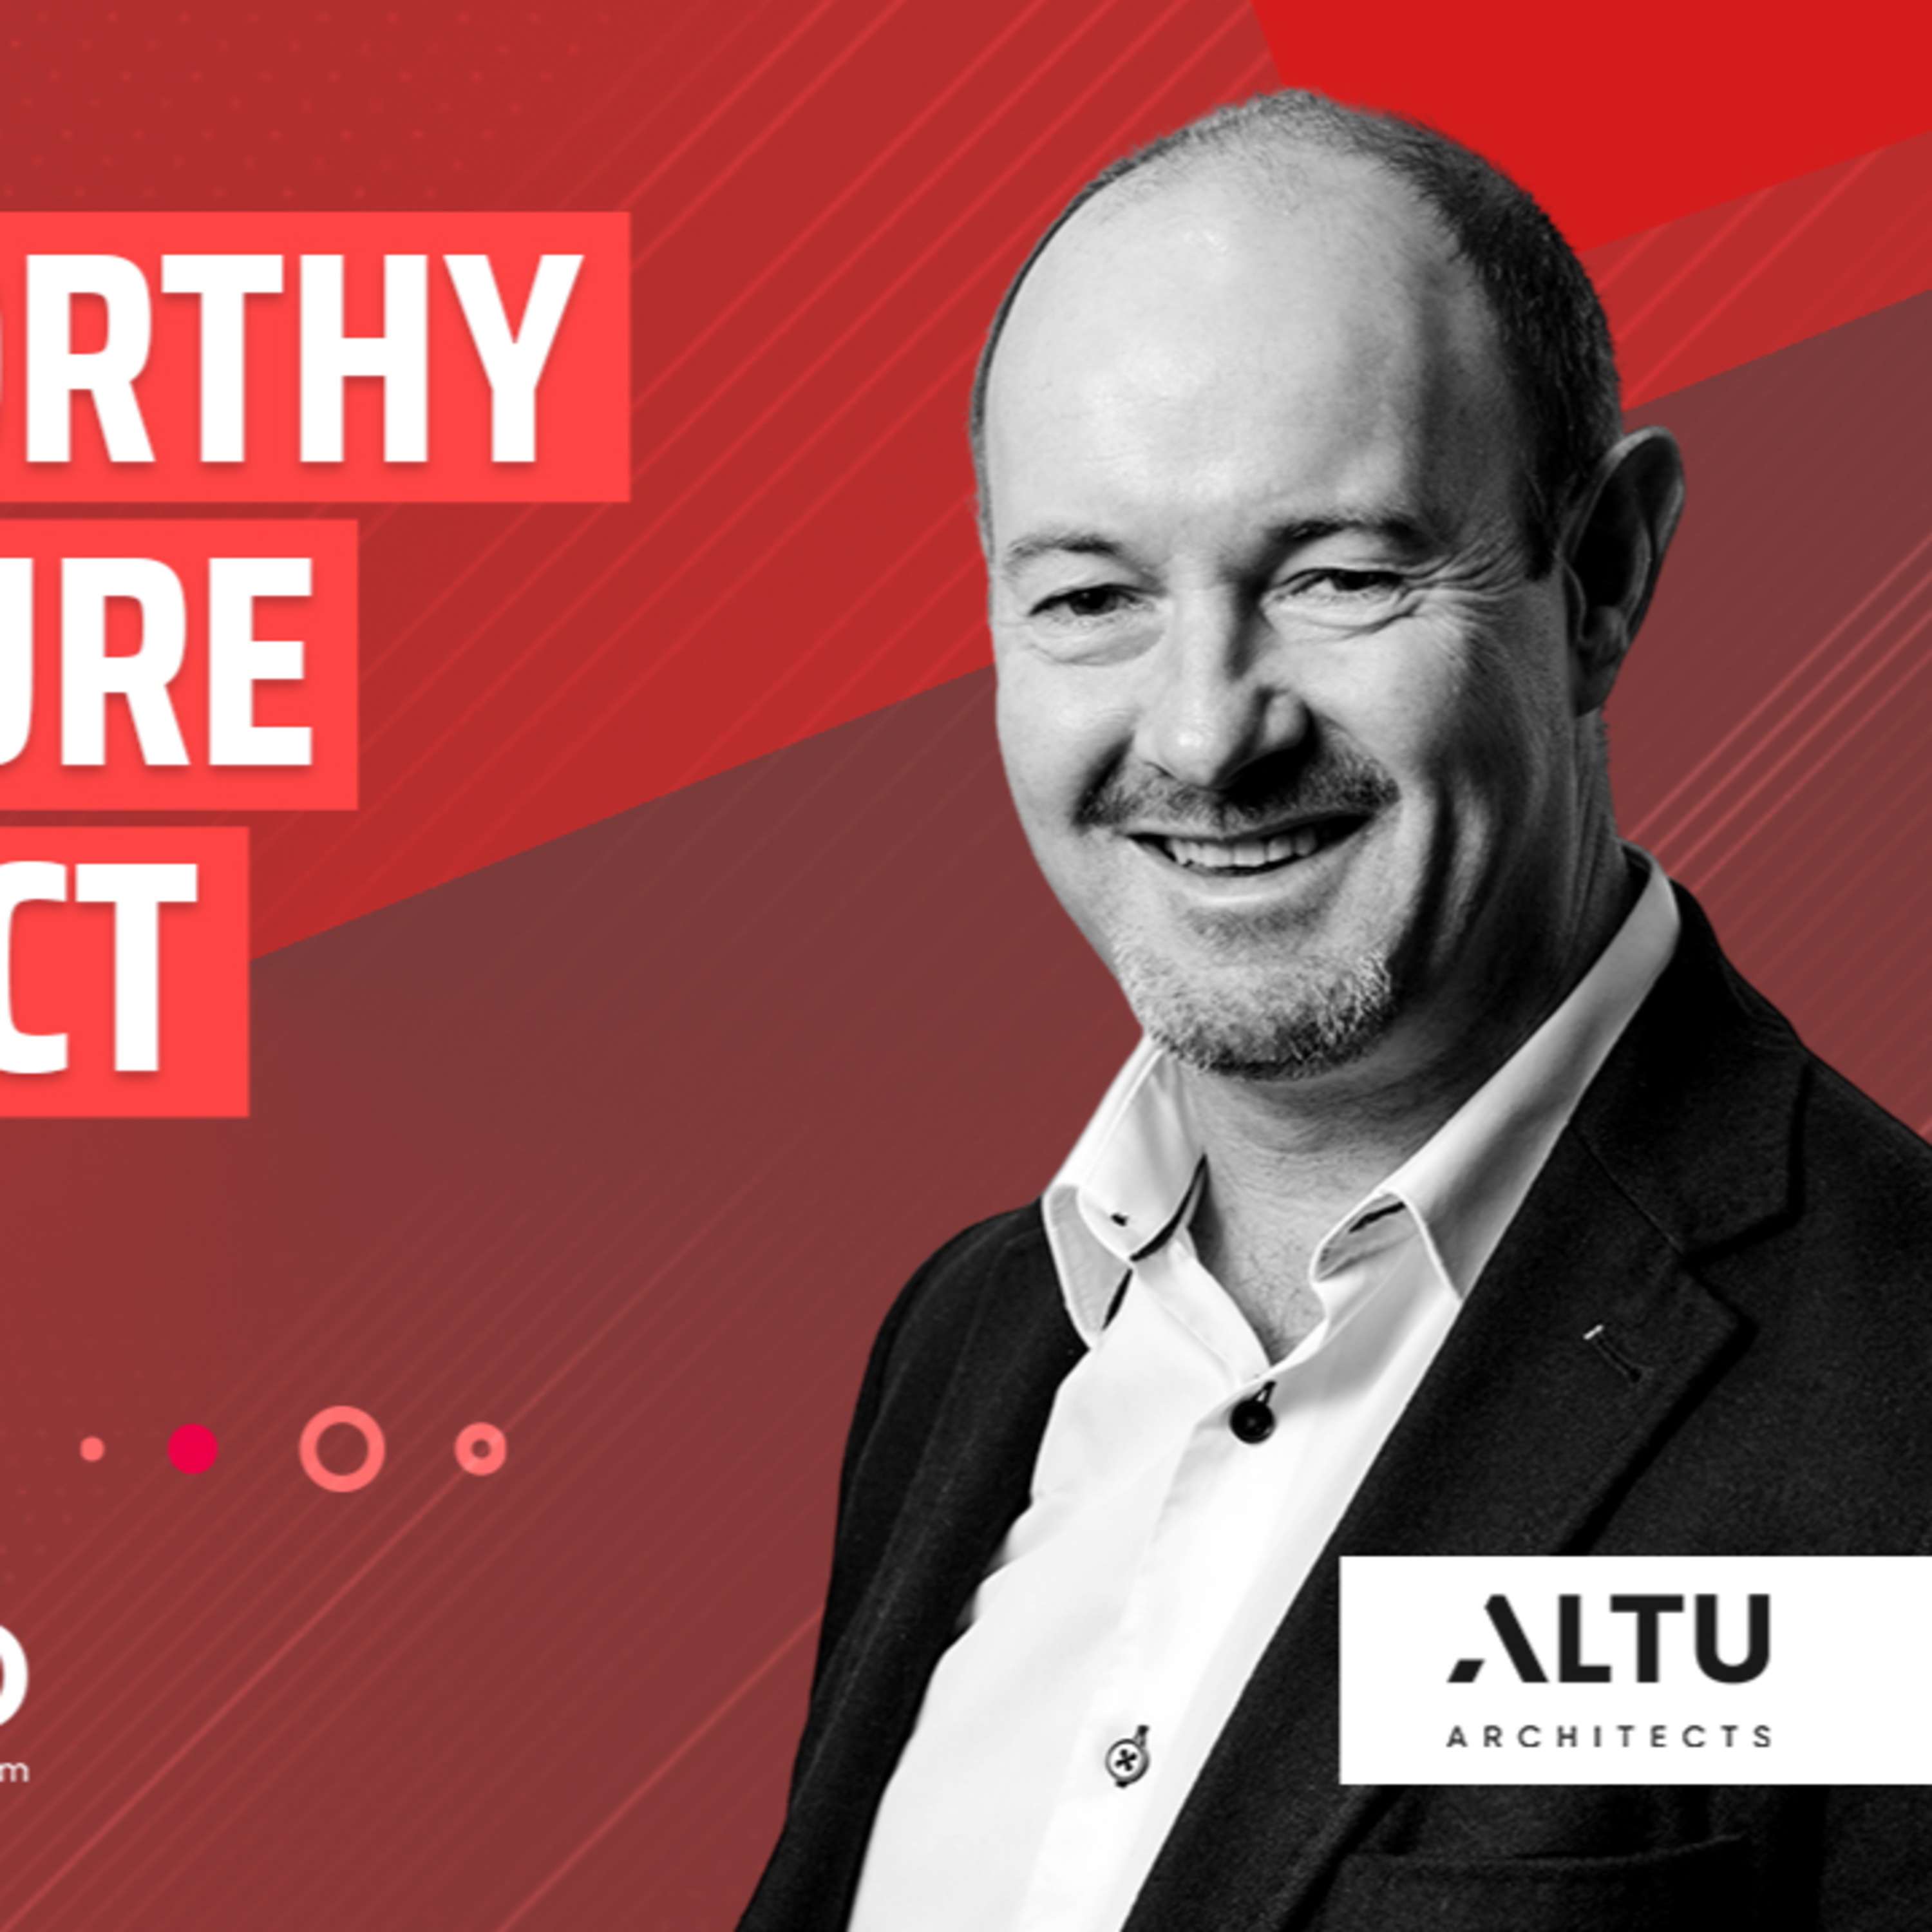 Breaking Ground on iPropertyRadio: Meet the Leaders - Jim Gallagher, Altu Architects